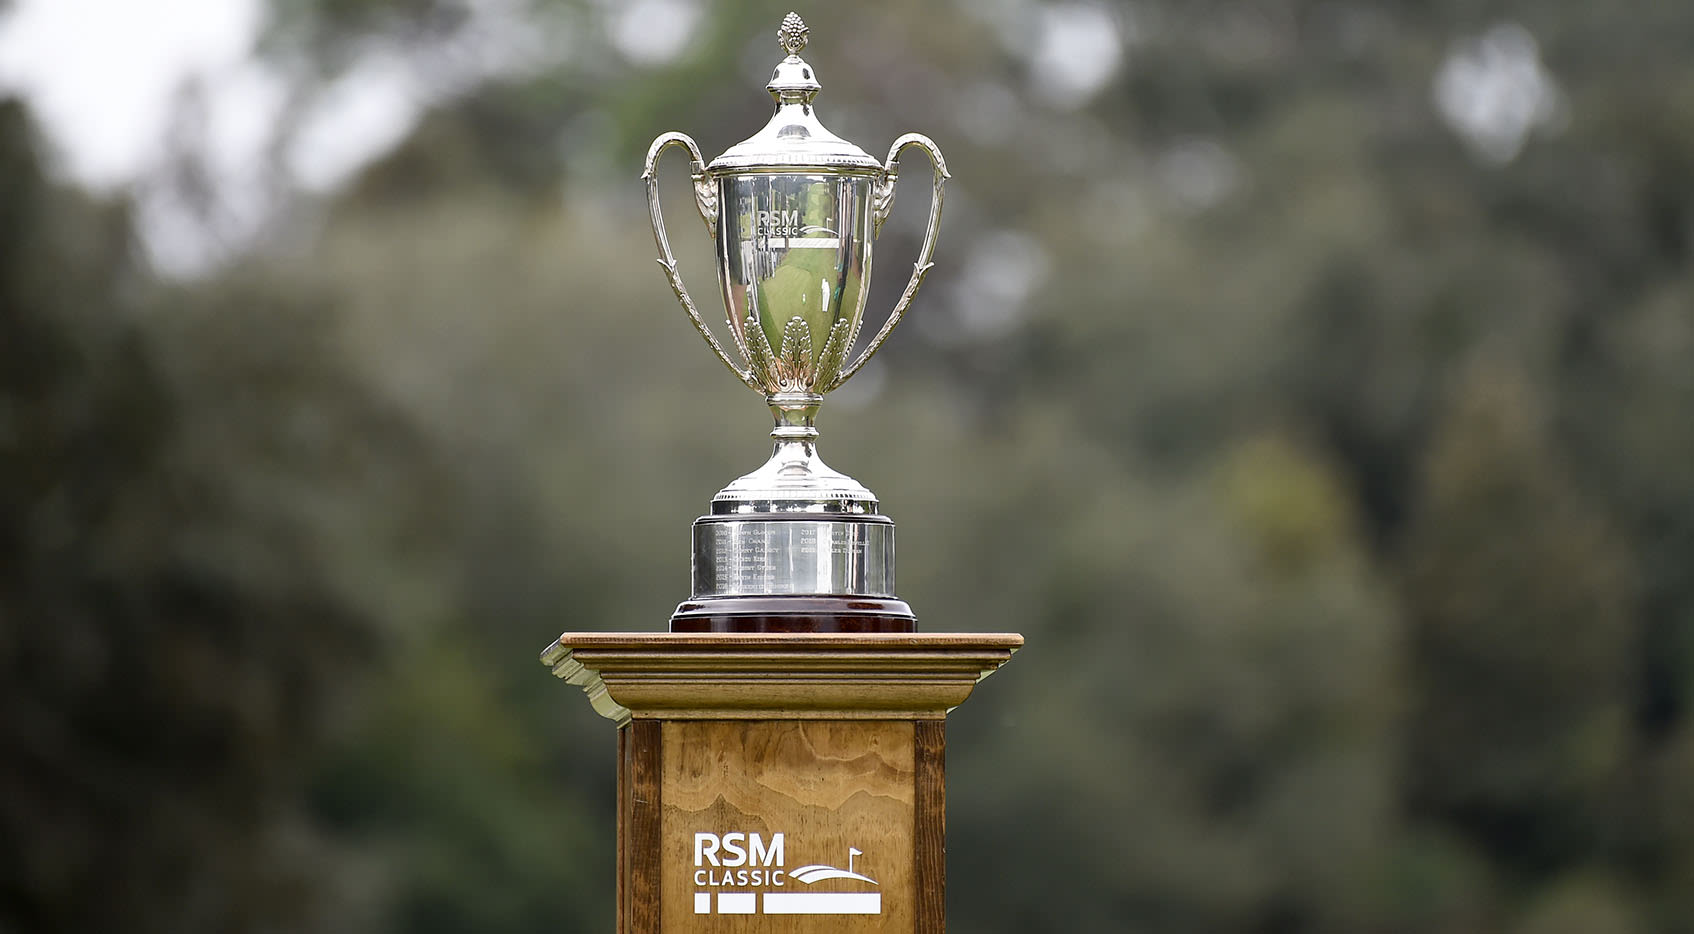 How to watch The RSM Classic, Round 2 Featured Groups, live scores, tee times, TV times